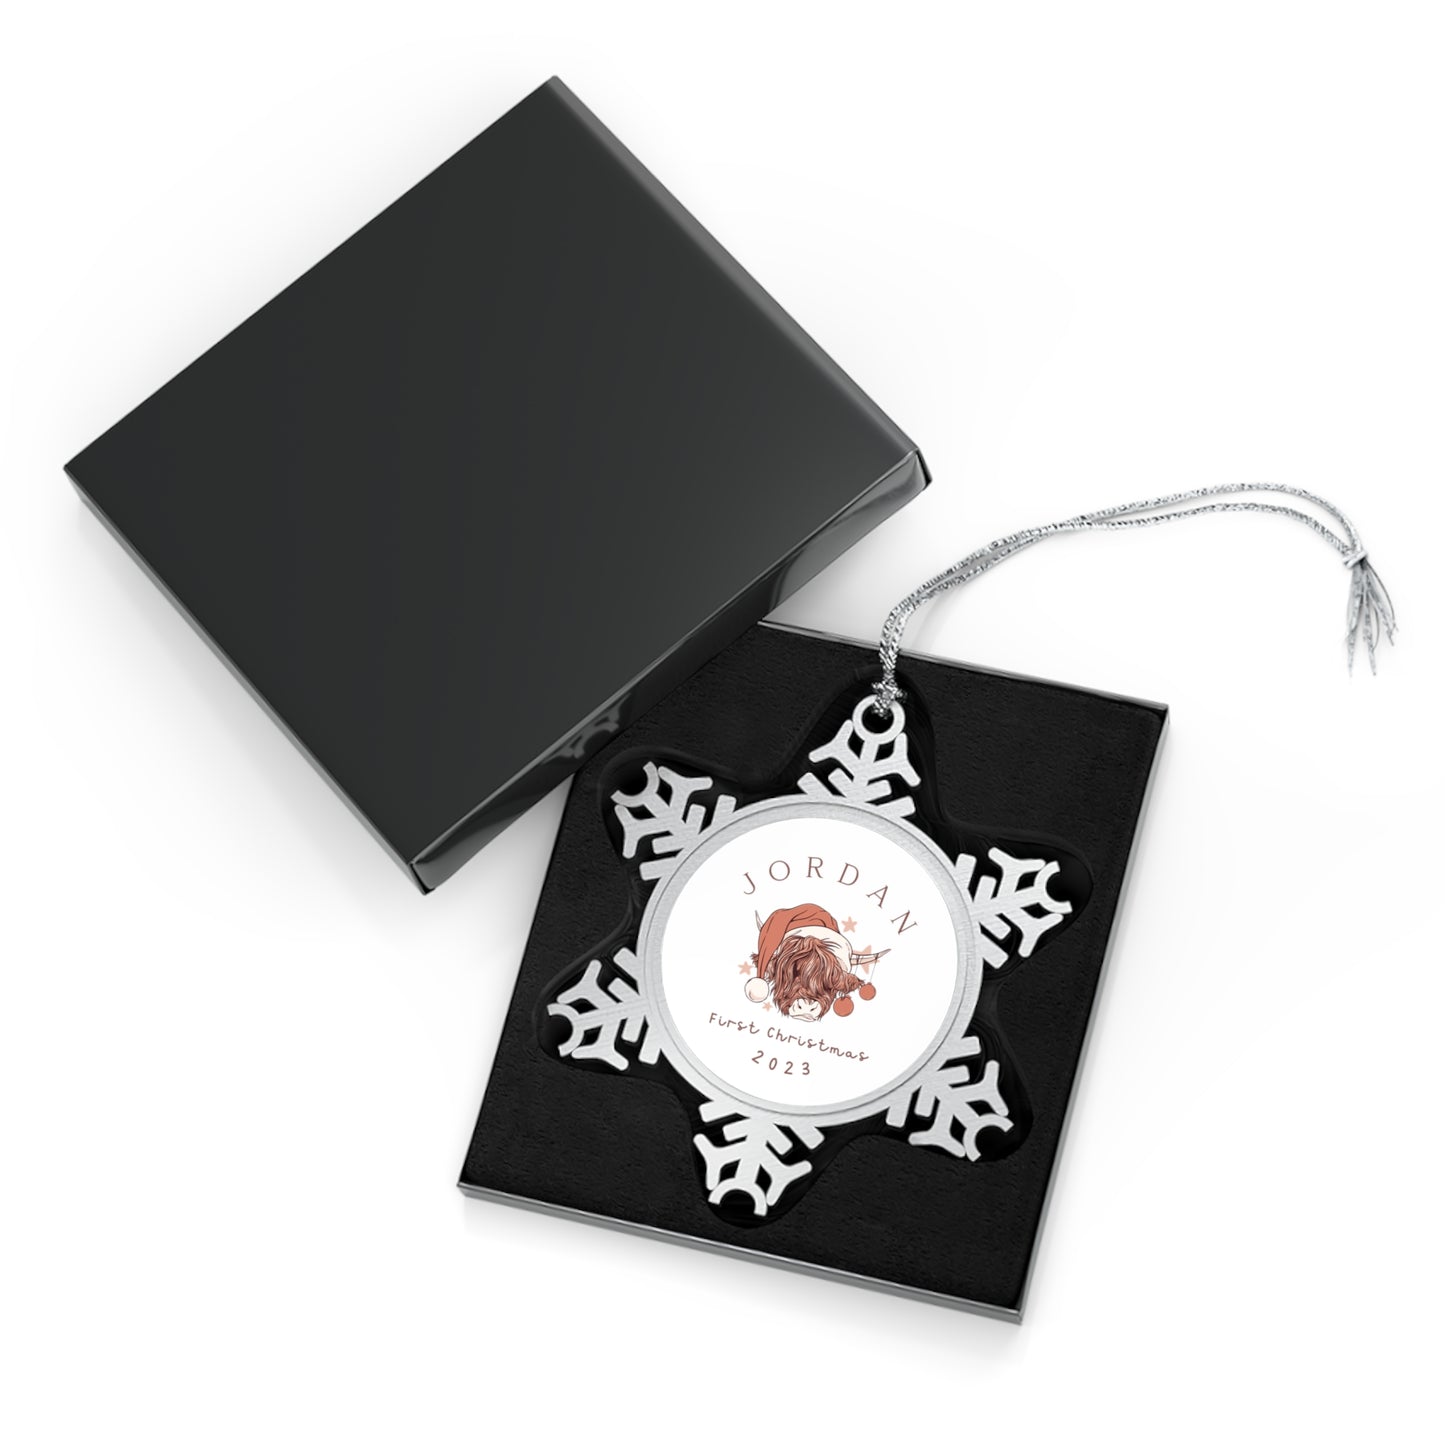 Personalised Pewter Snowflake Ornament | Christmas Cow